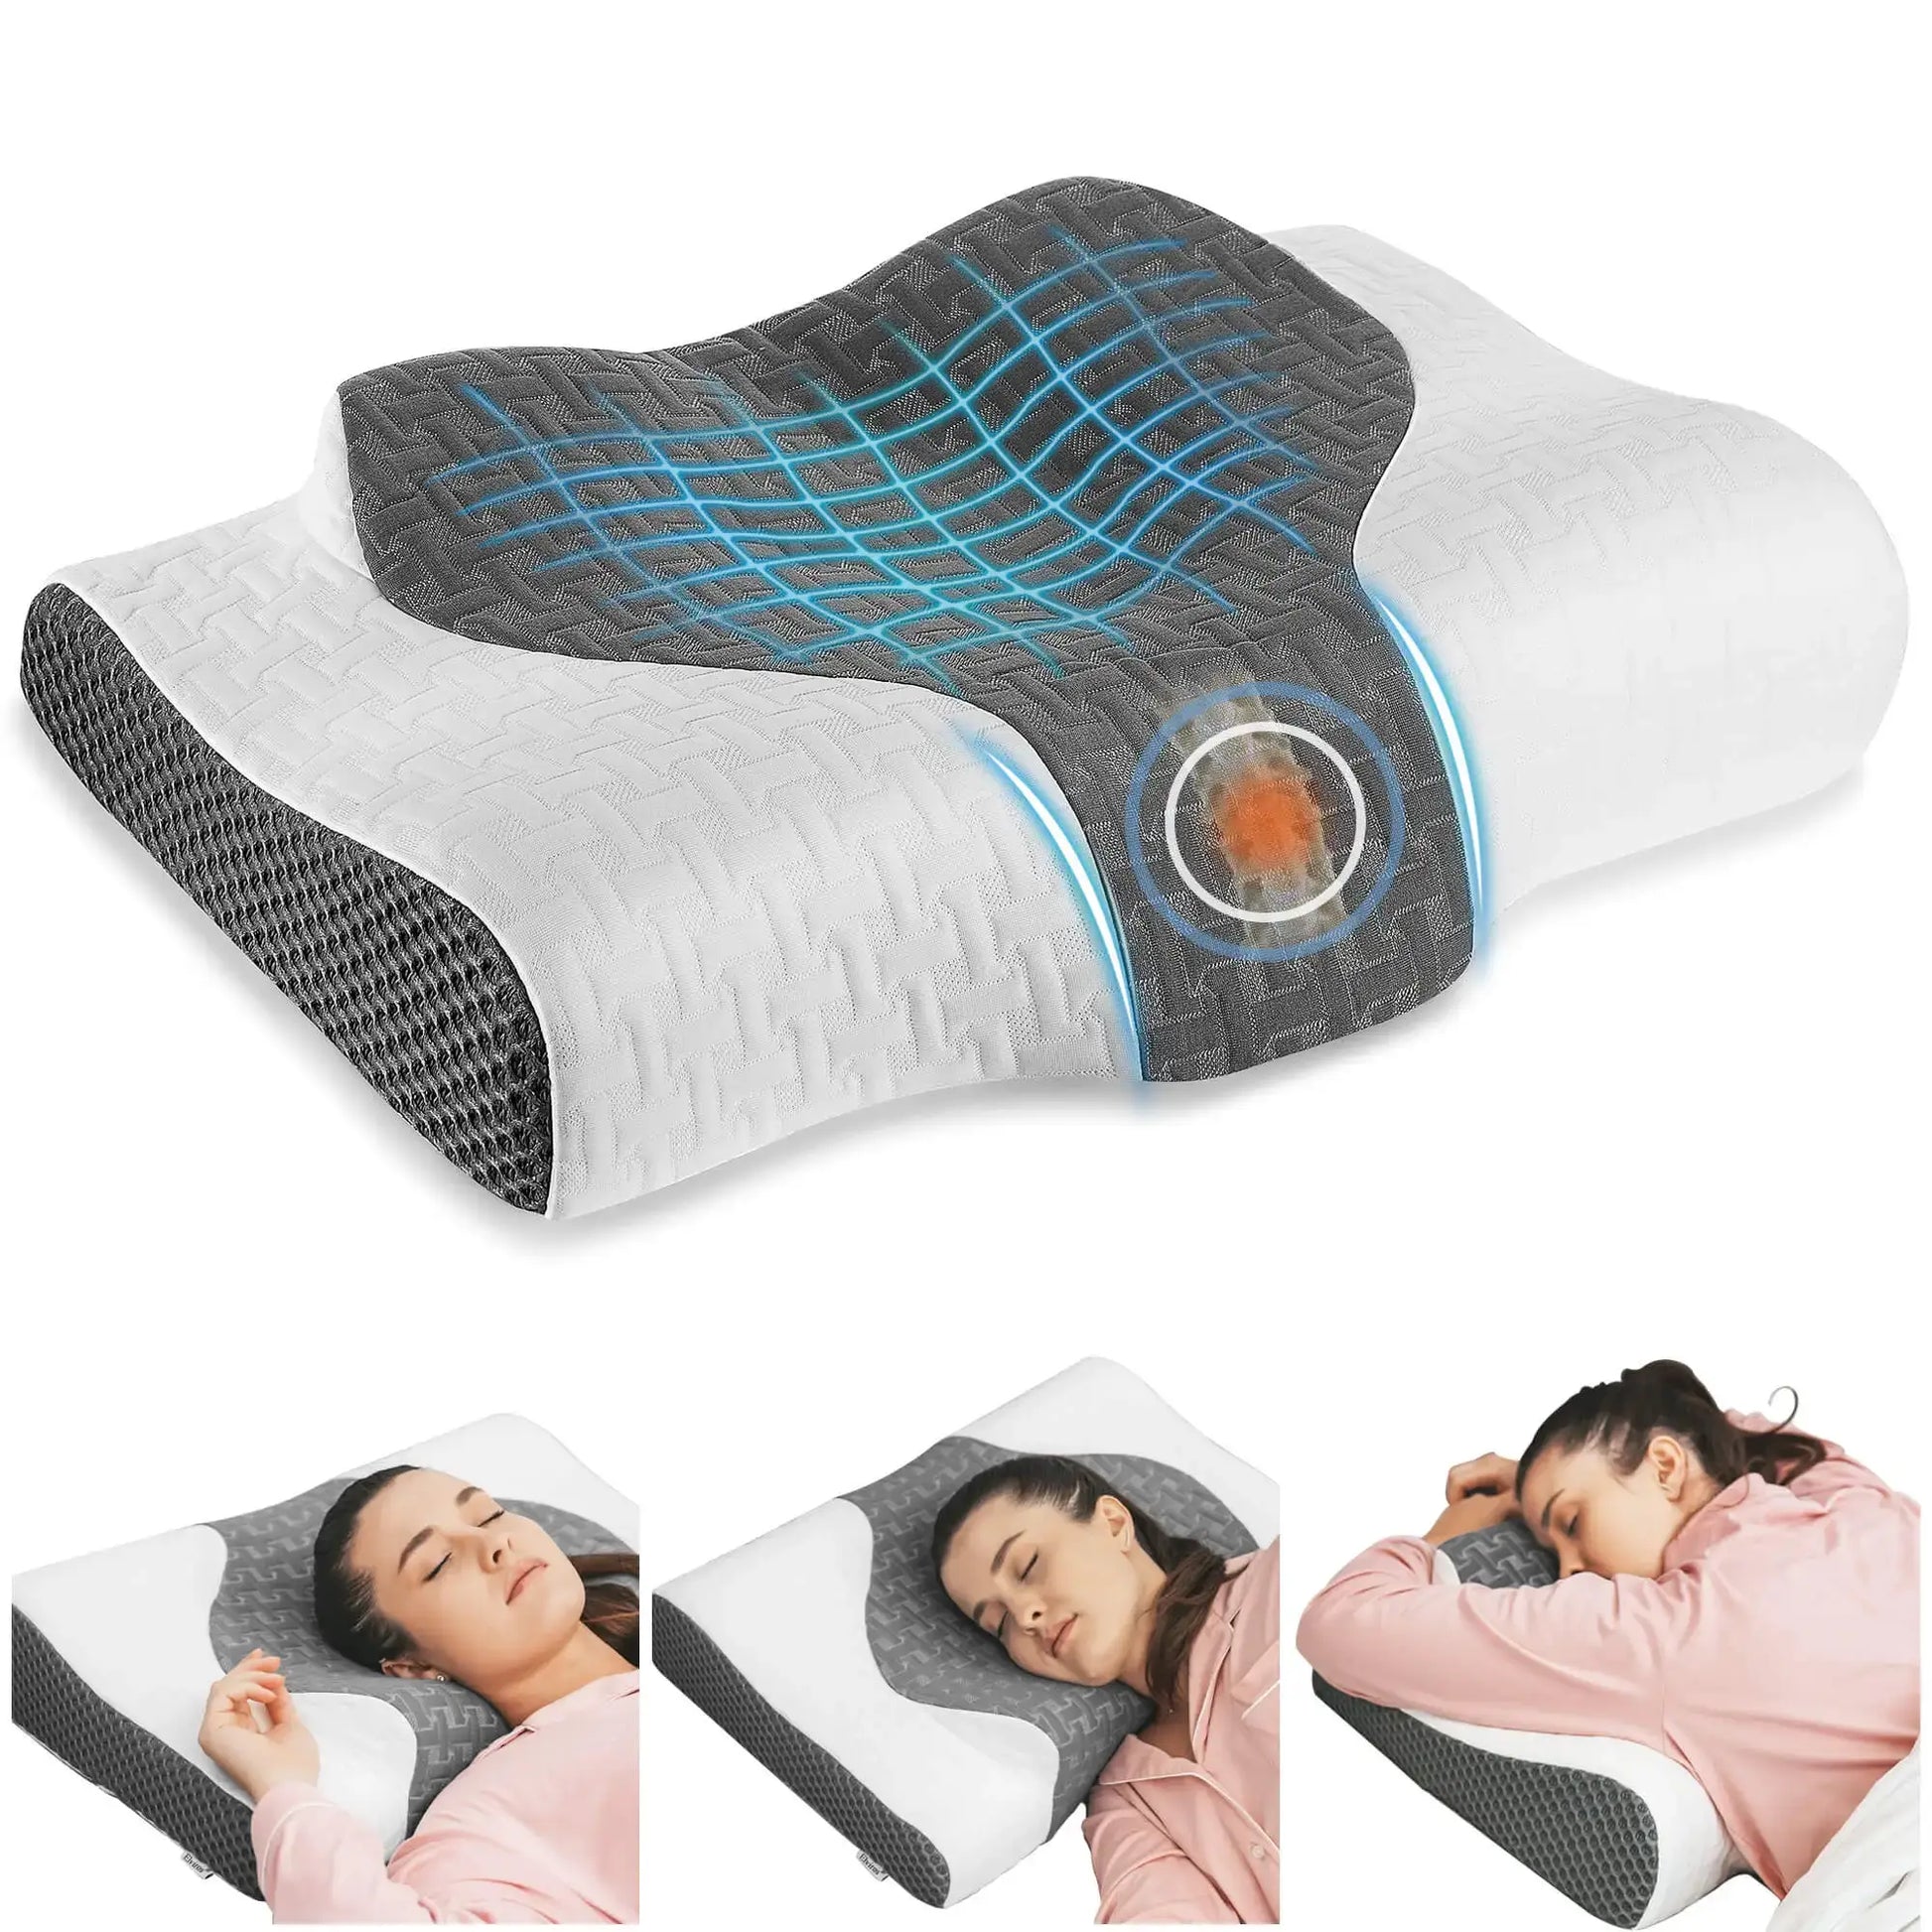 Elviros 2-in-1 Contour Orthopedic Support Pillows-1